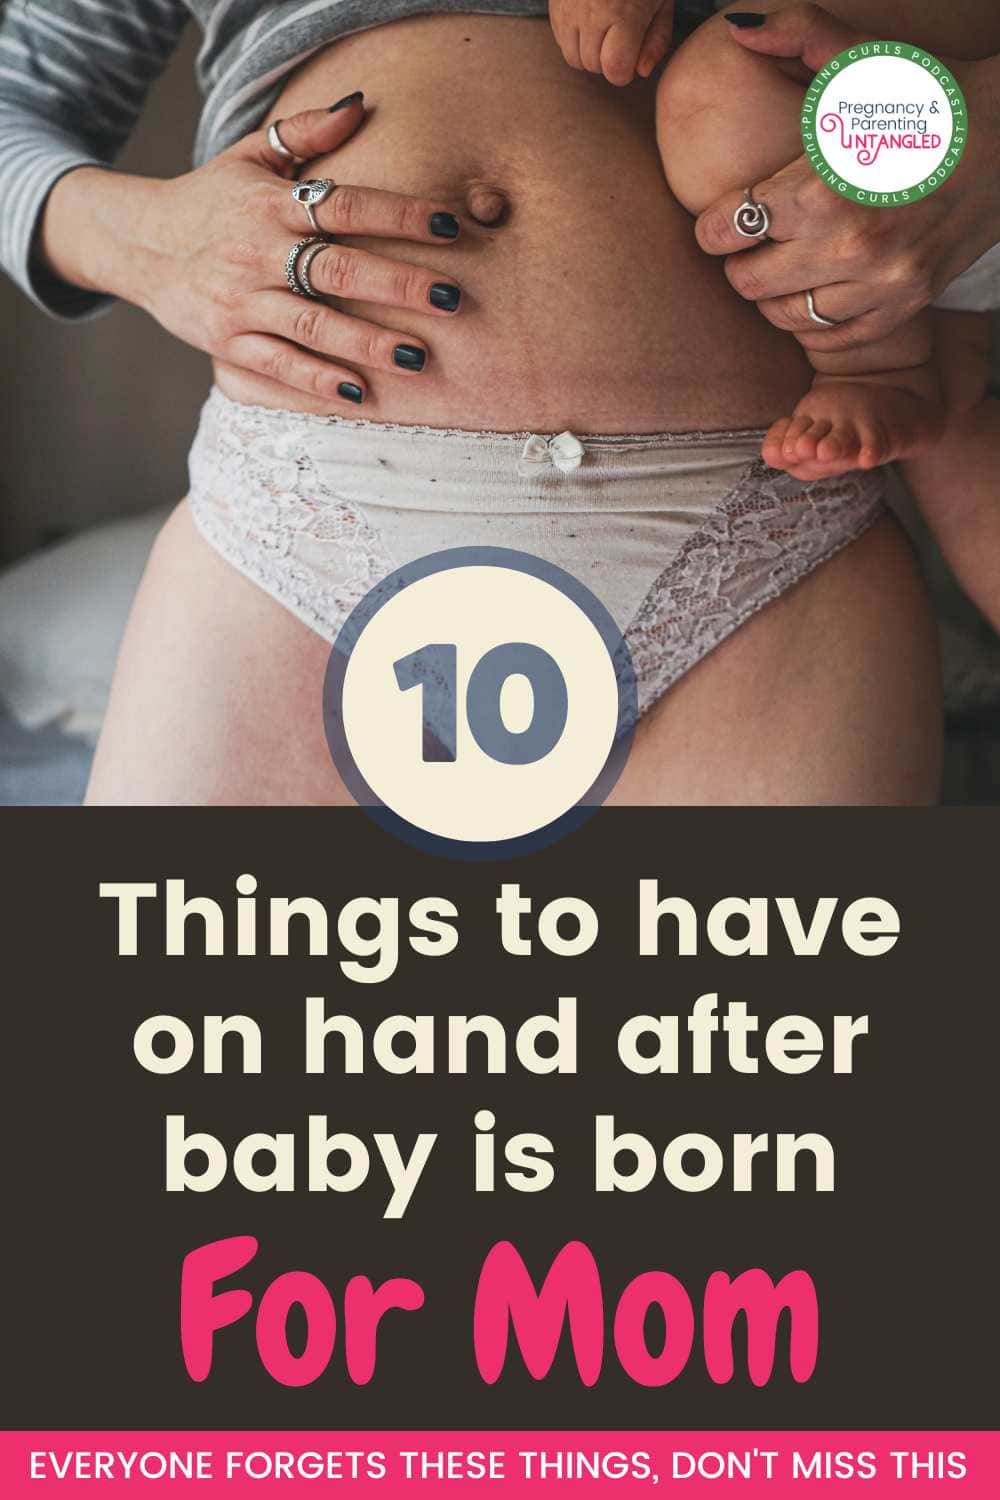 Setting up a cozy, safe, and functional space for your newborn is essential. We've handpicked 10 indispensable items to have on hand after your baby is born, aimed at making life easier for both of you. These are the real game-changers that seasoned parents swear by and wish they'd known about sooner. Trust us - you'll want to bookmark this guide before baby's big arrival! via @pullingcurls